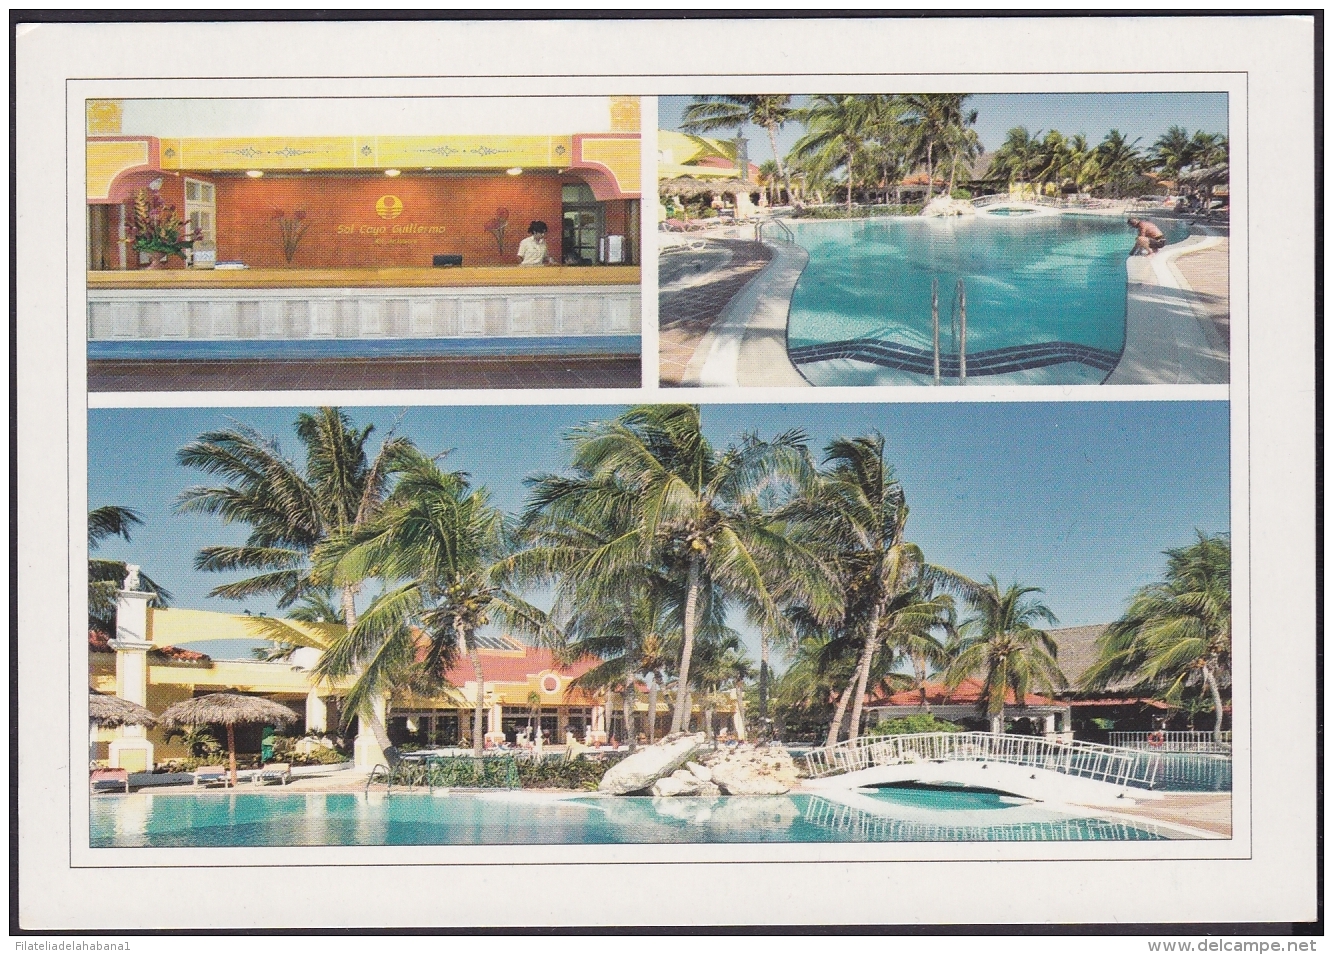 2012-EP-13 CUBA 2012. POSTAL STATIONERY. HOTEL SOL CAYO GUILLERMO #19. DISPLACED ENGRAVING. VISTAS TURISTICAS. UNUSED. - Covers & Documents